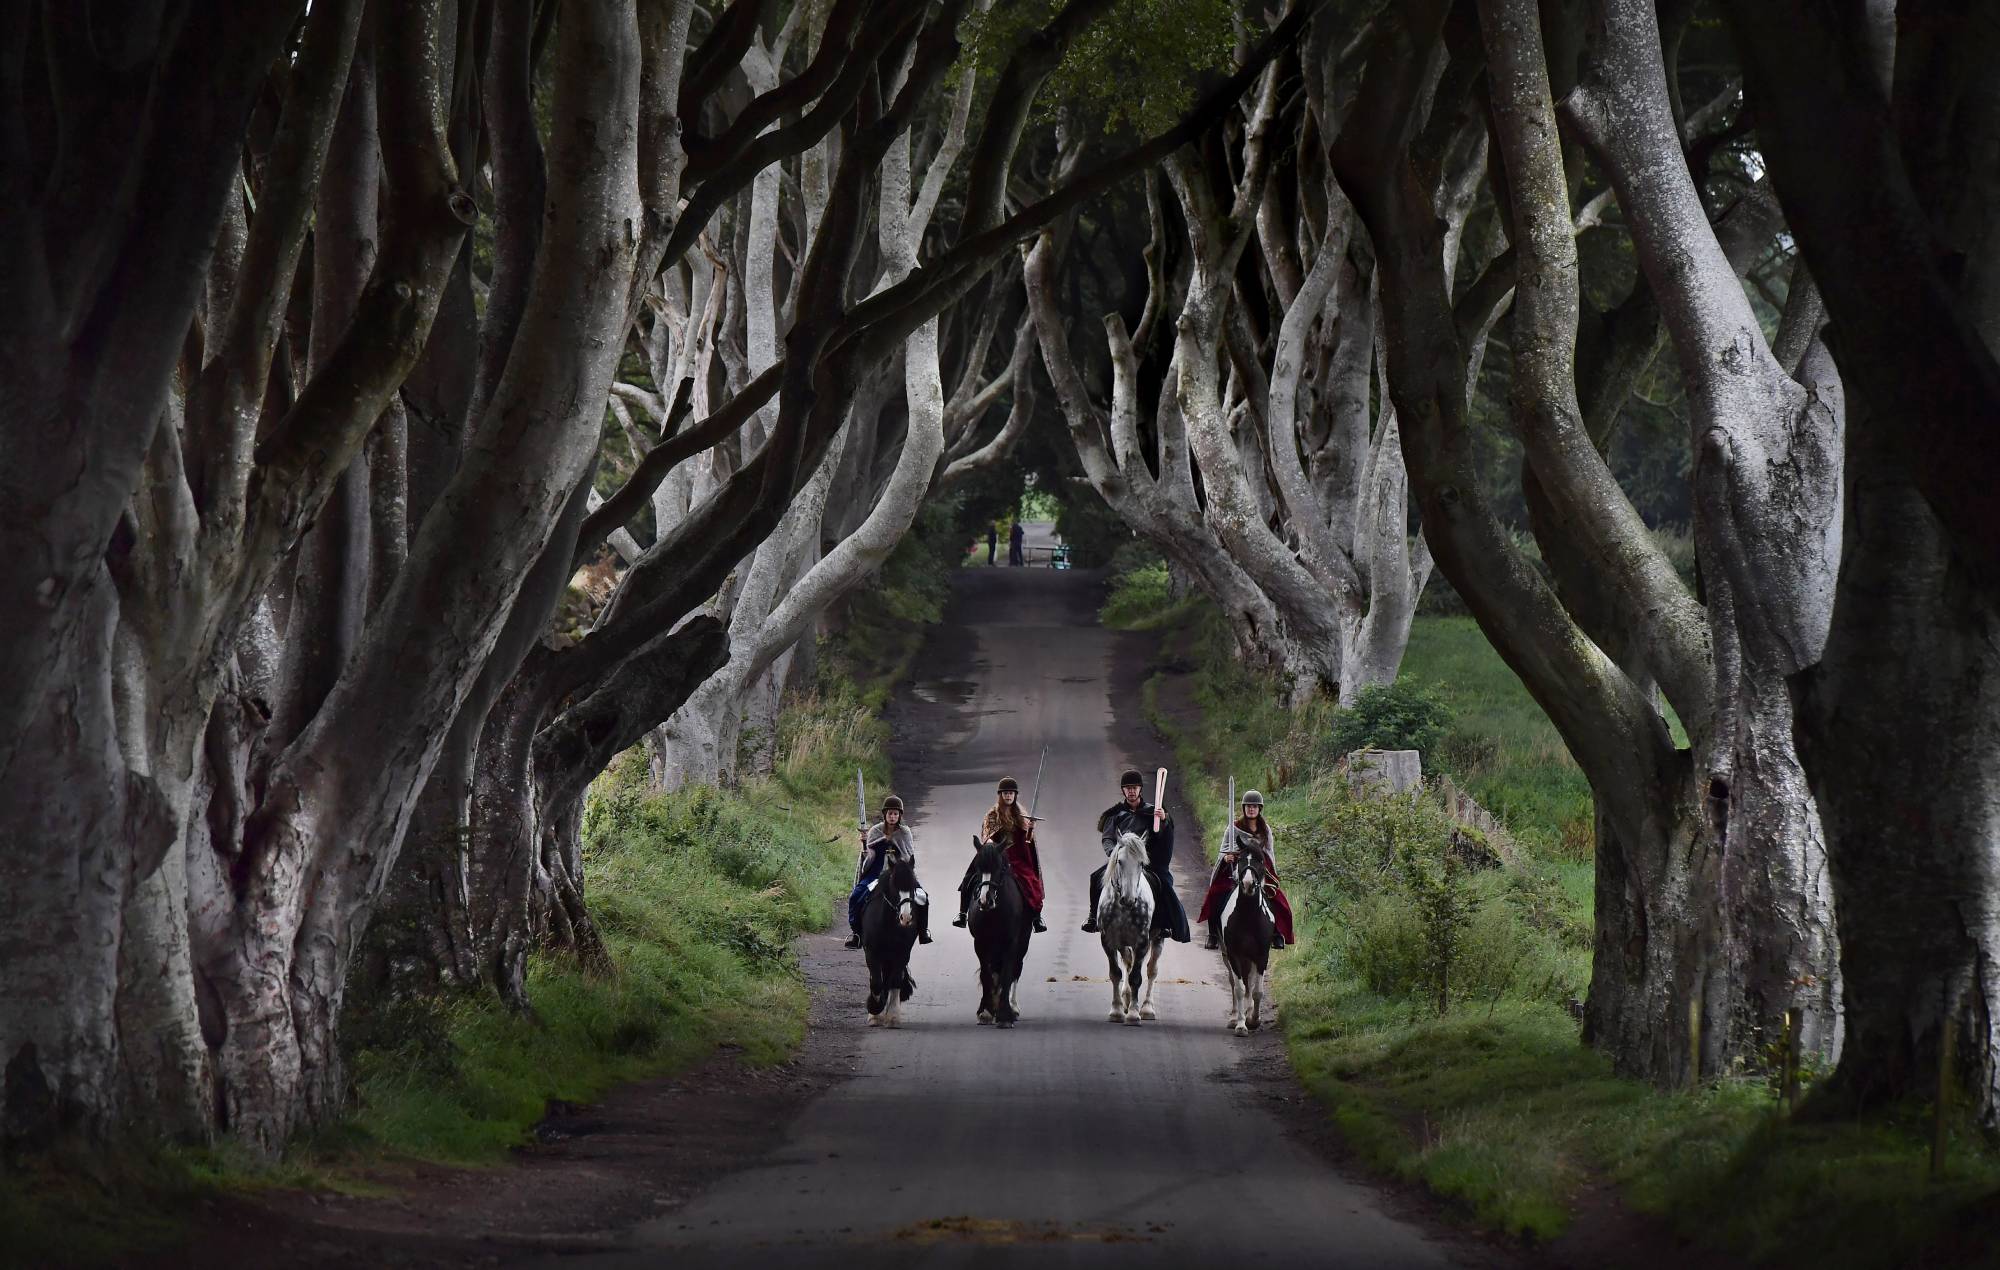 Trees made famous by ‘Game of Thrones’ may be chopped down